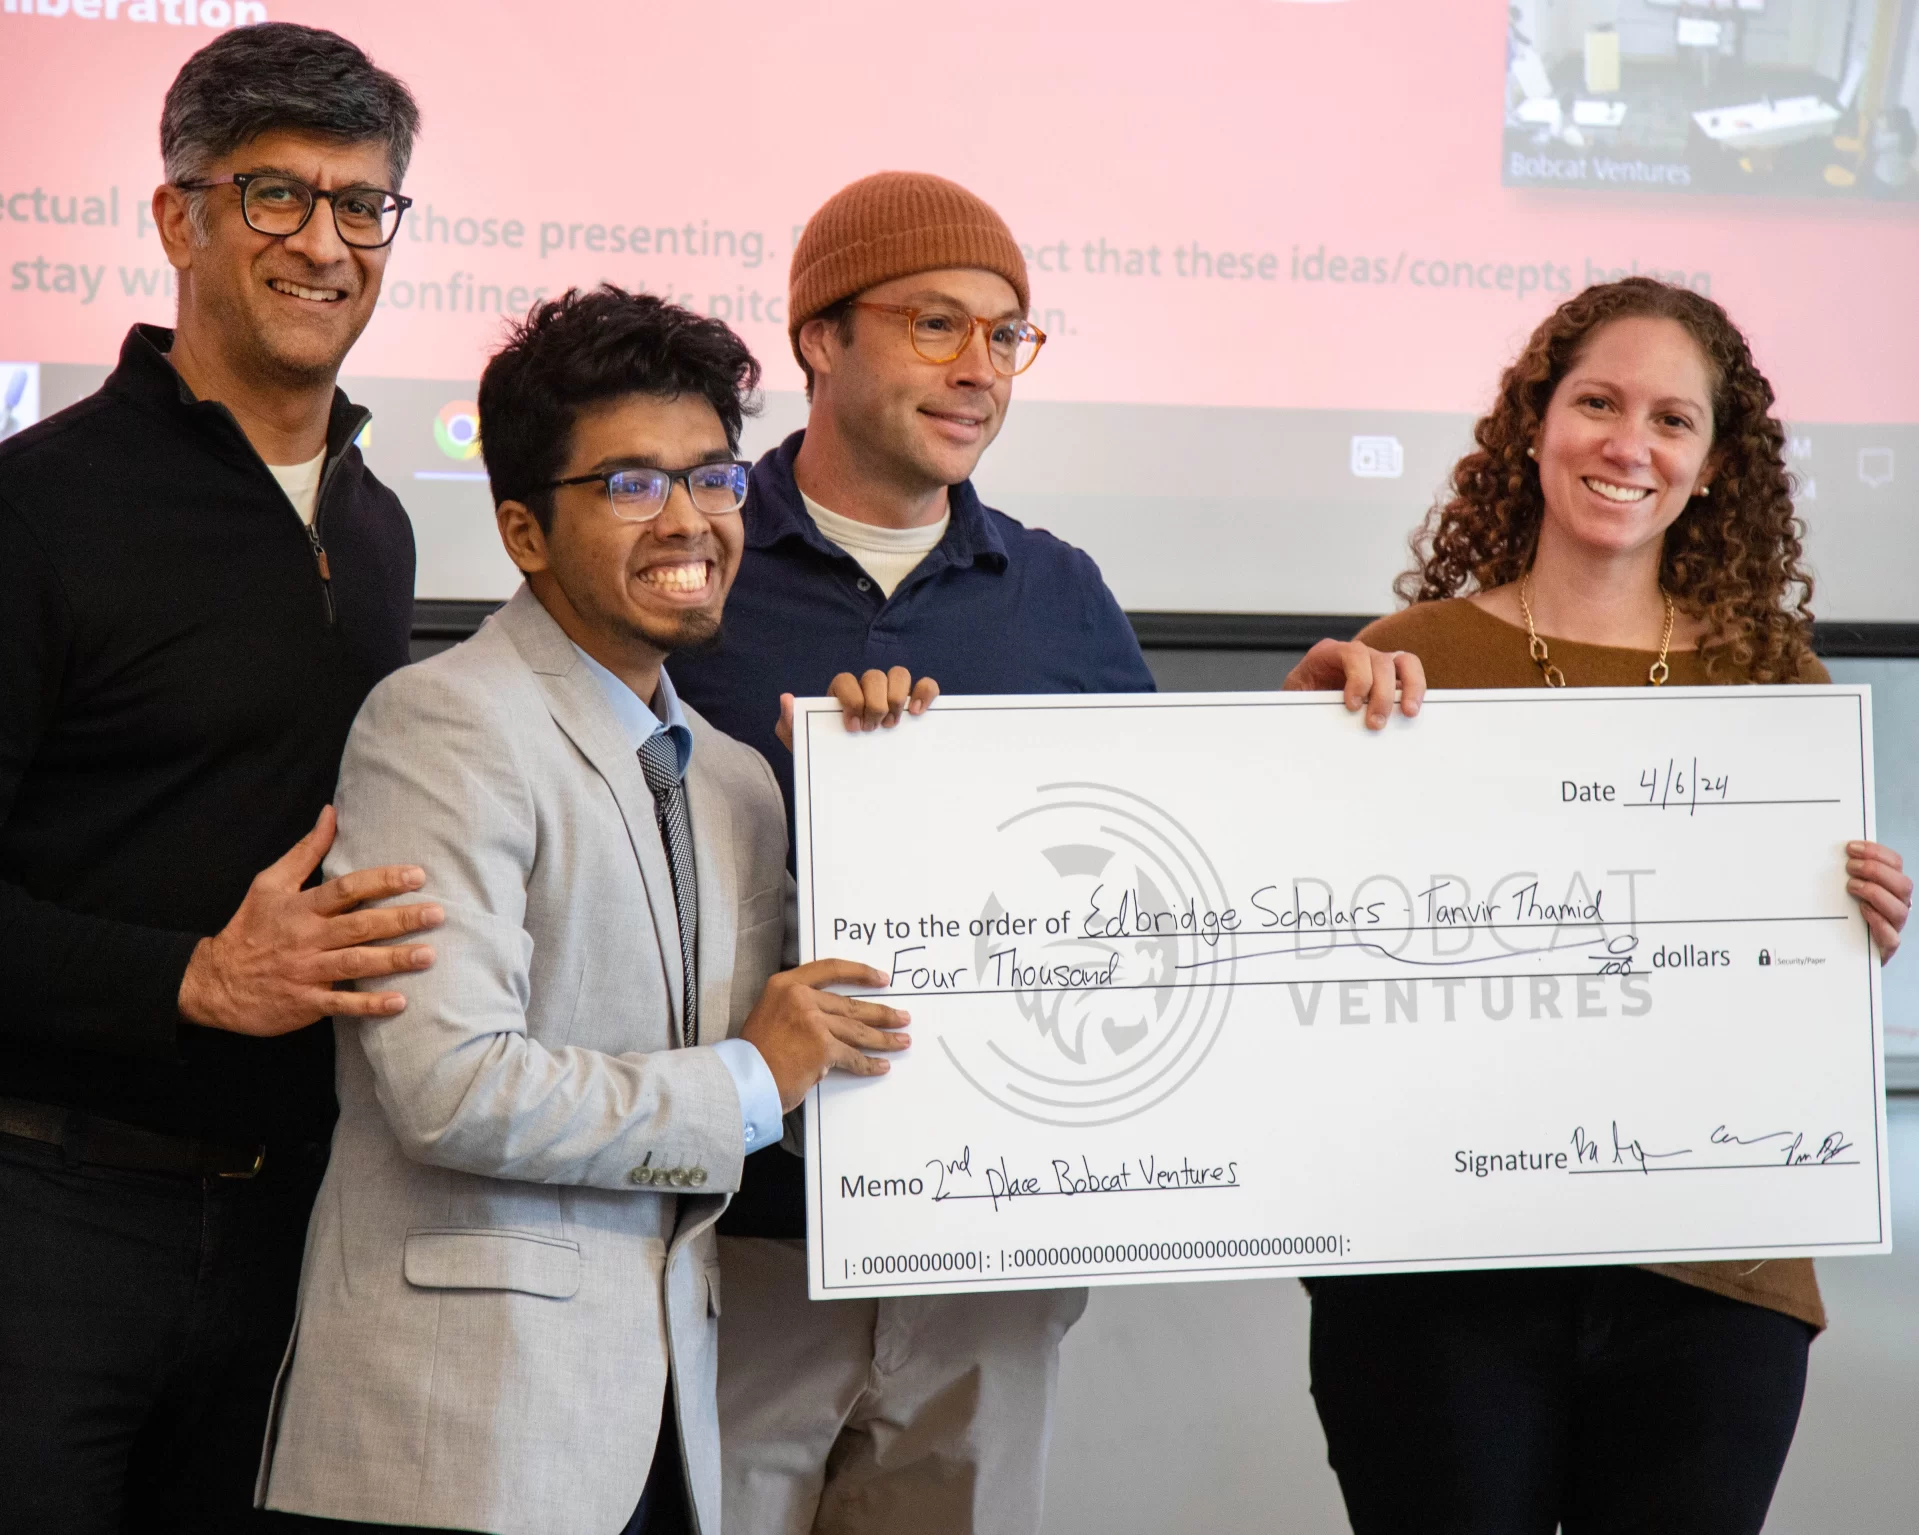 Bates students competed in Bobcat Ventures on April 6, presenting in front of alumni entrepreneurs for cash prizes for their business ideas. The top prize of $8,000 was won by Aidan Stark-Chessa for his non-alcoholic drink, HoneySuckle. Tanvir Thamid '26 poses with the judges and his $4,000 check for his idea, Edbridge Scholars.